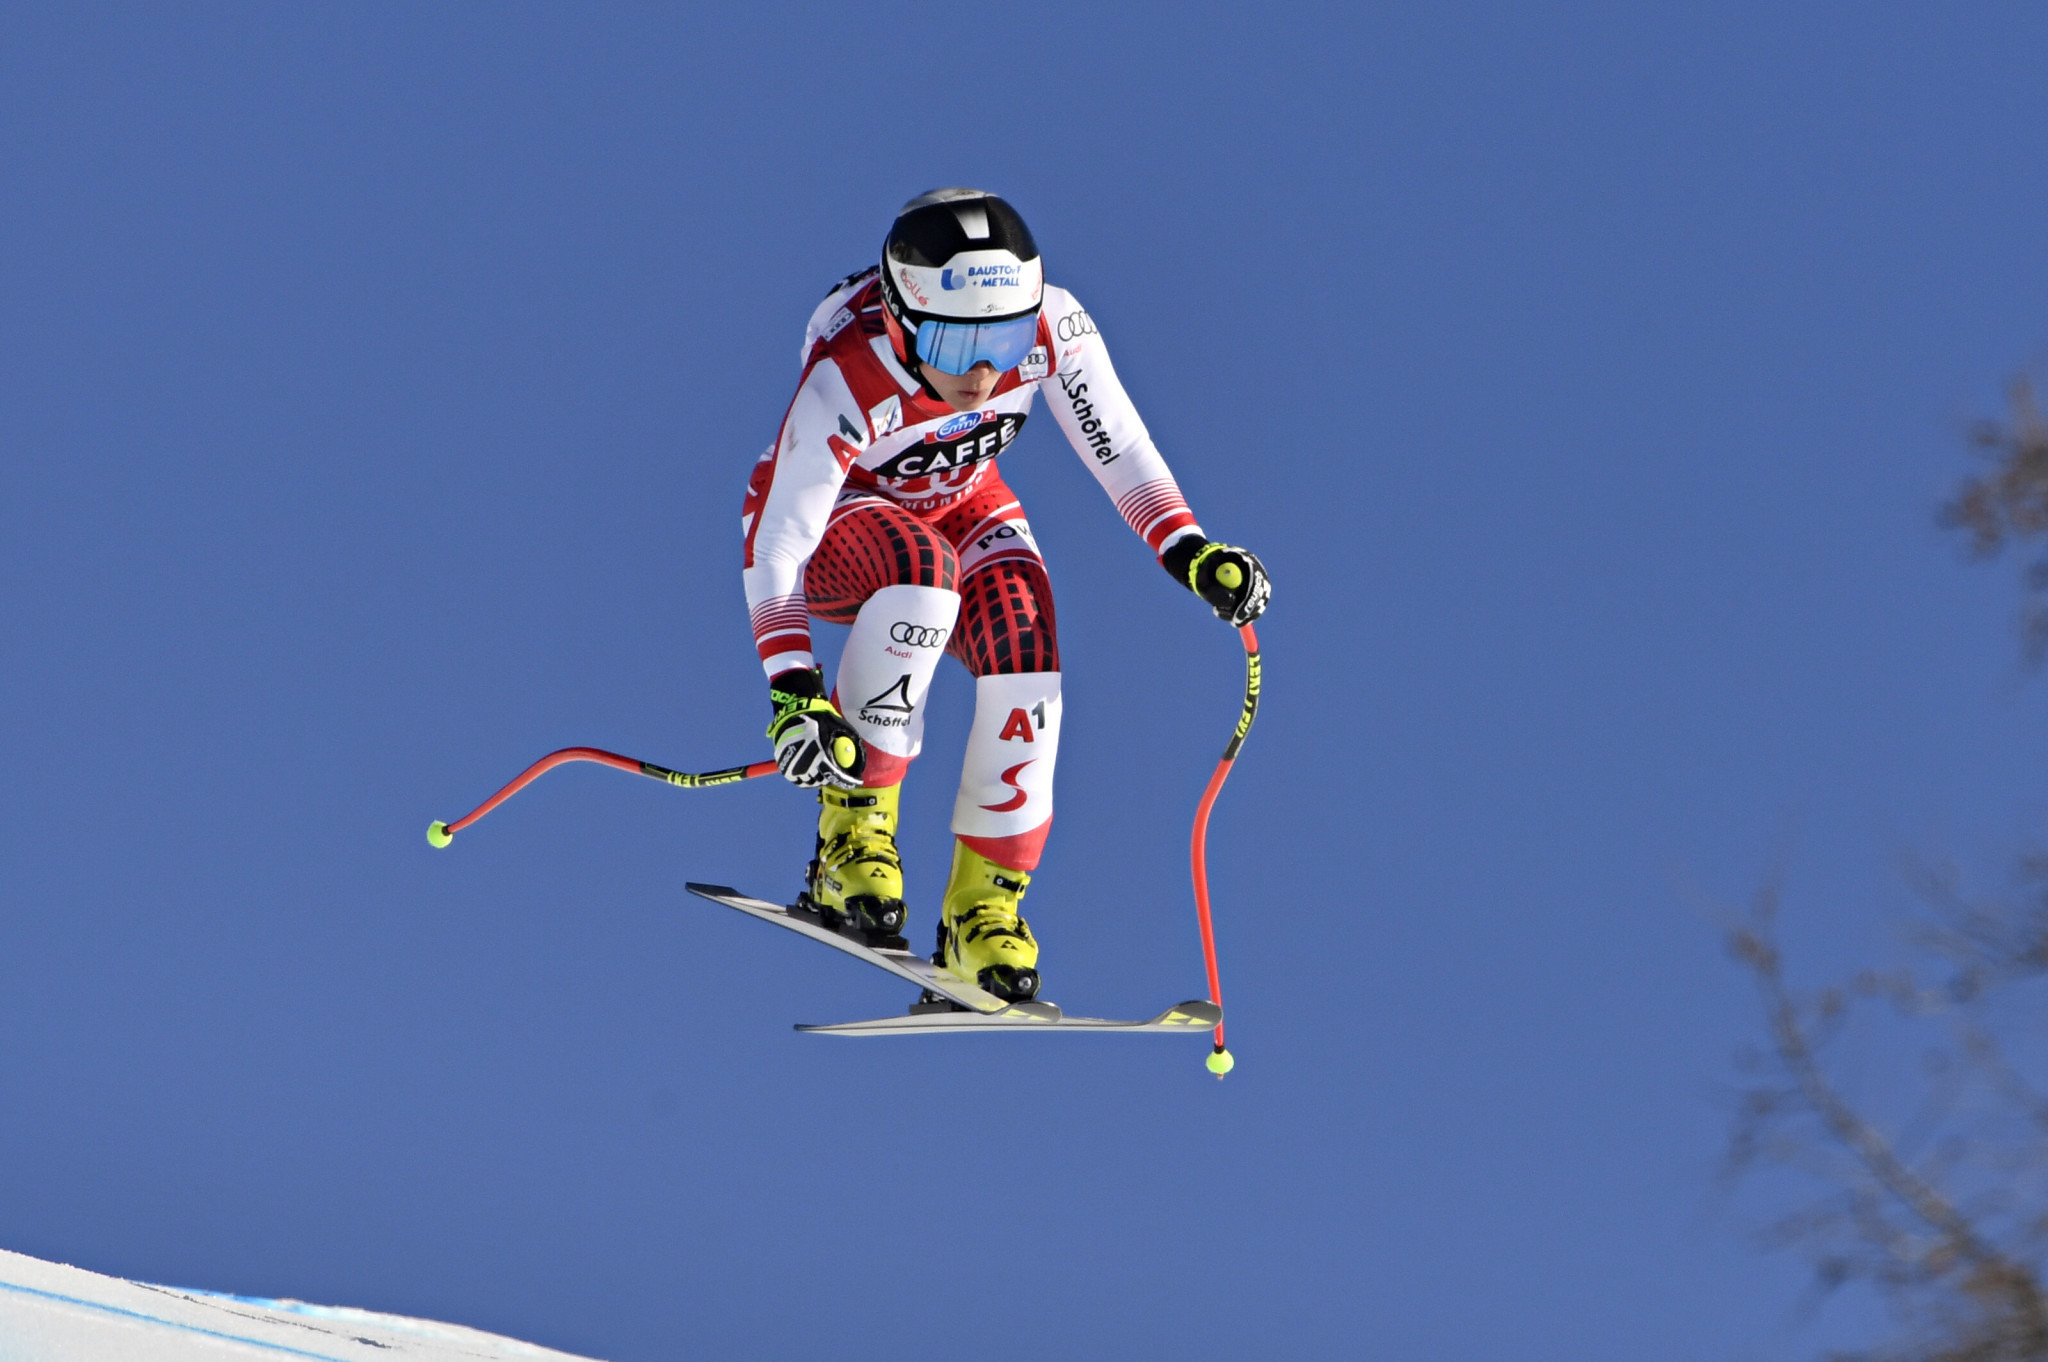 Austria's Nicole Schmidhofer will be looking for another good performance in the women's downhill at the FIS Alpine Skiing World Cup in Rosa Khutor as she seeks to win the title ©Getty Images